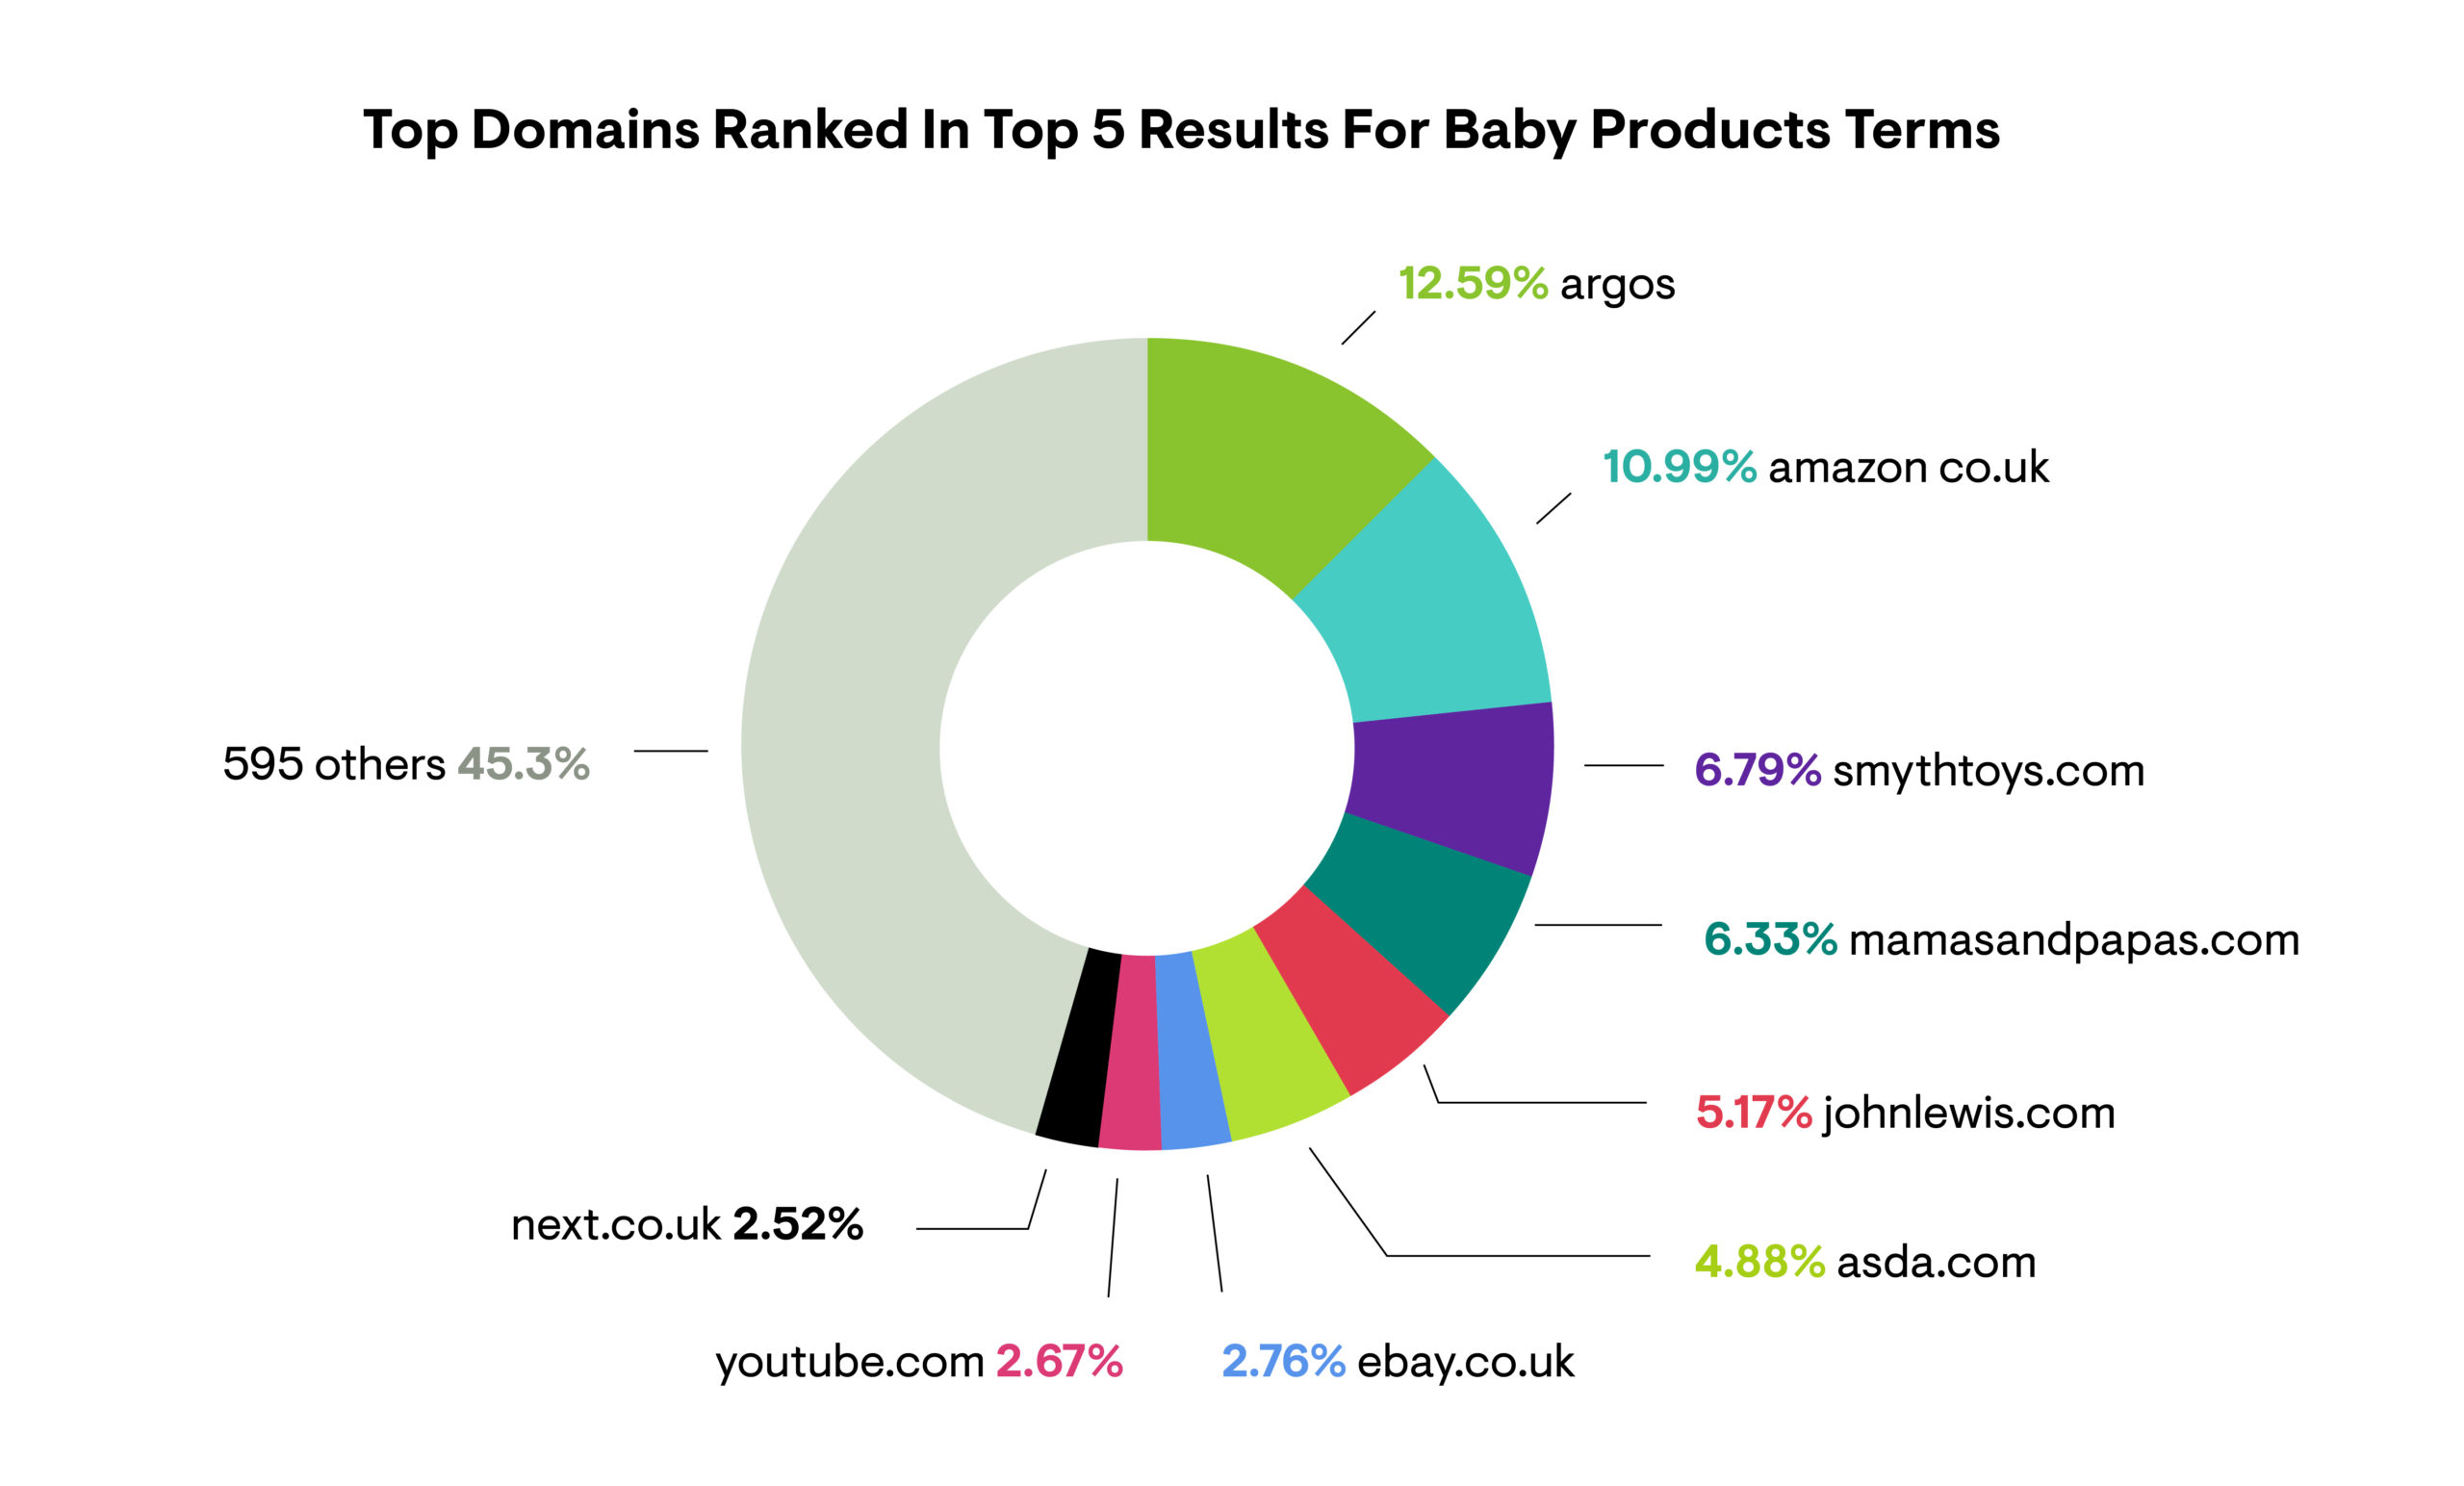 Top Domains Ranked In Top 5 Results For Baby Products Terms